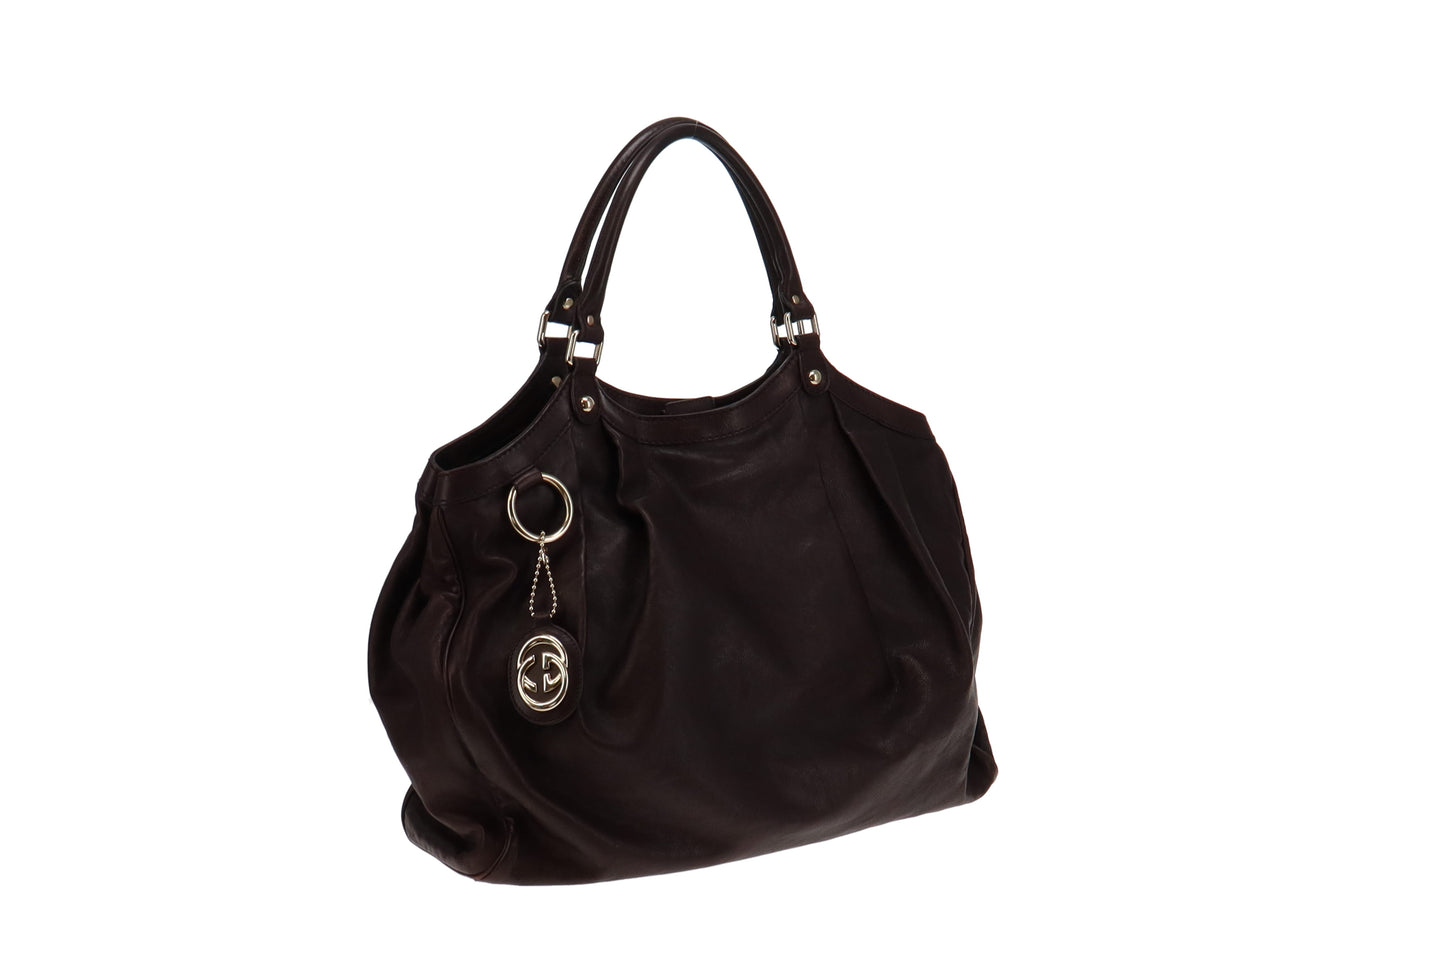 Gucci Dark Brown Leather Large Sukey Hobo